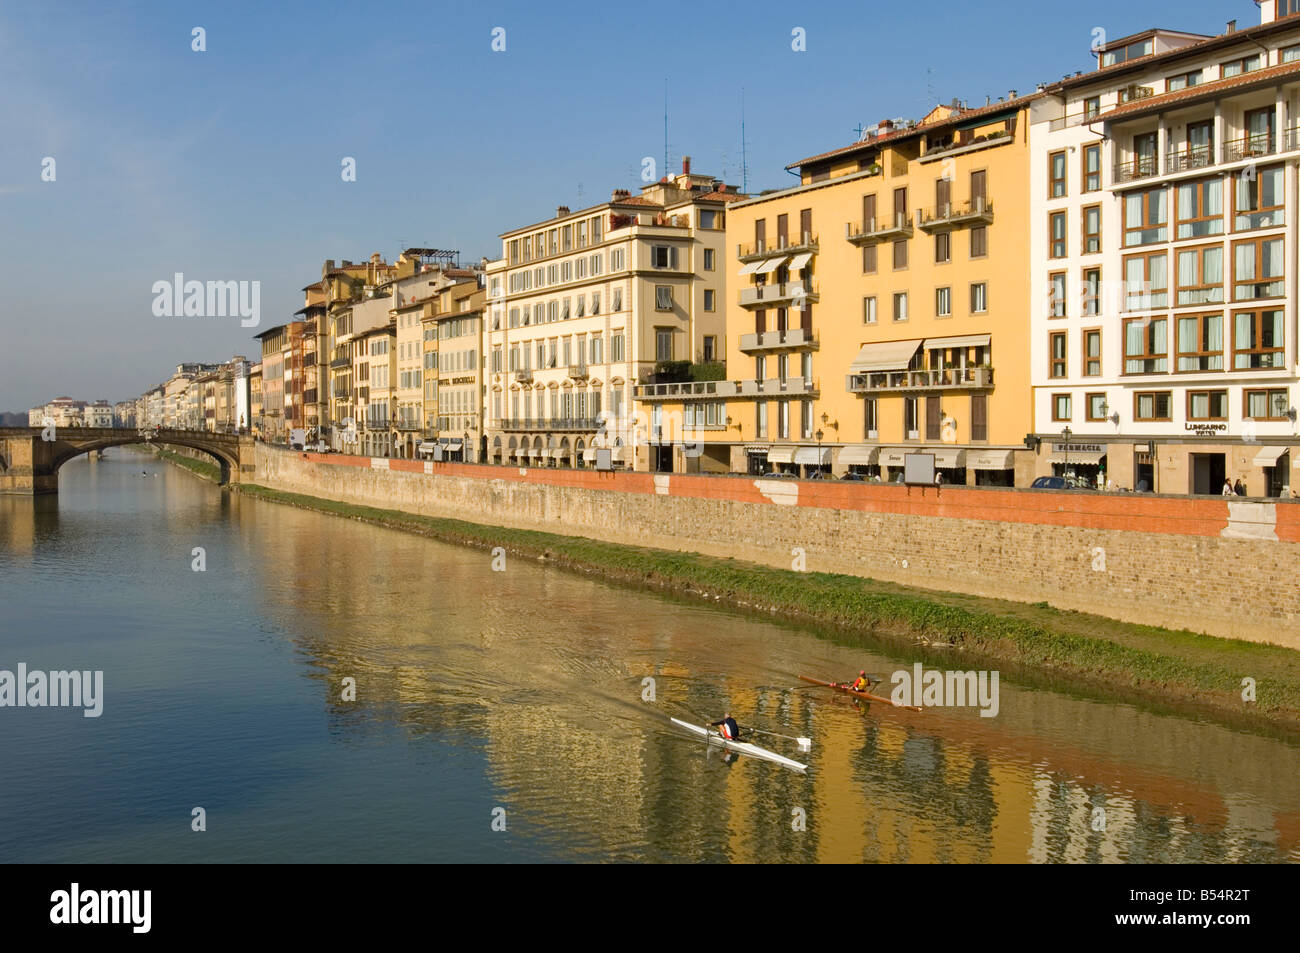 The buildings on Lungarno Degli Acciauoli in Florence reflected in the river Arno with 2 people rowing on the water. Stock Photo